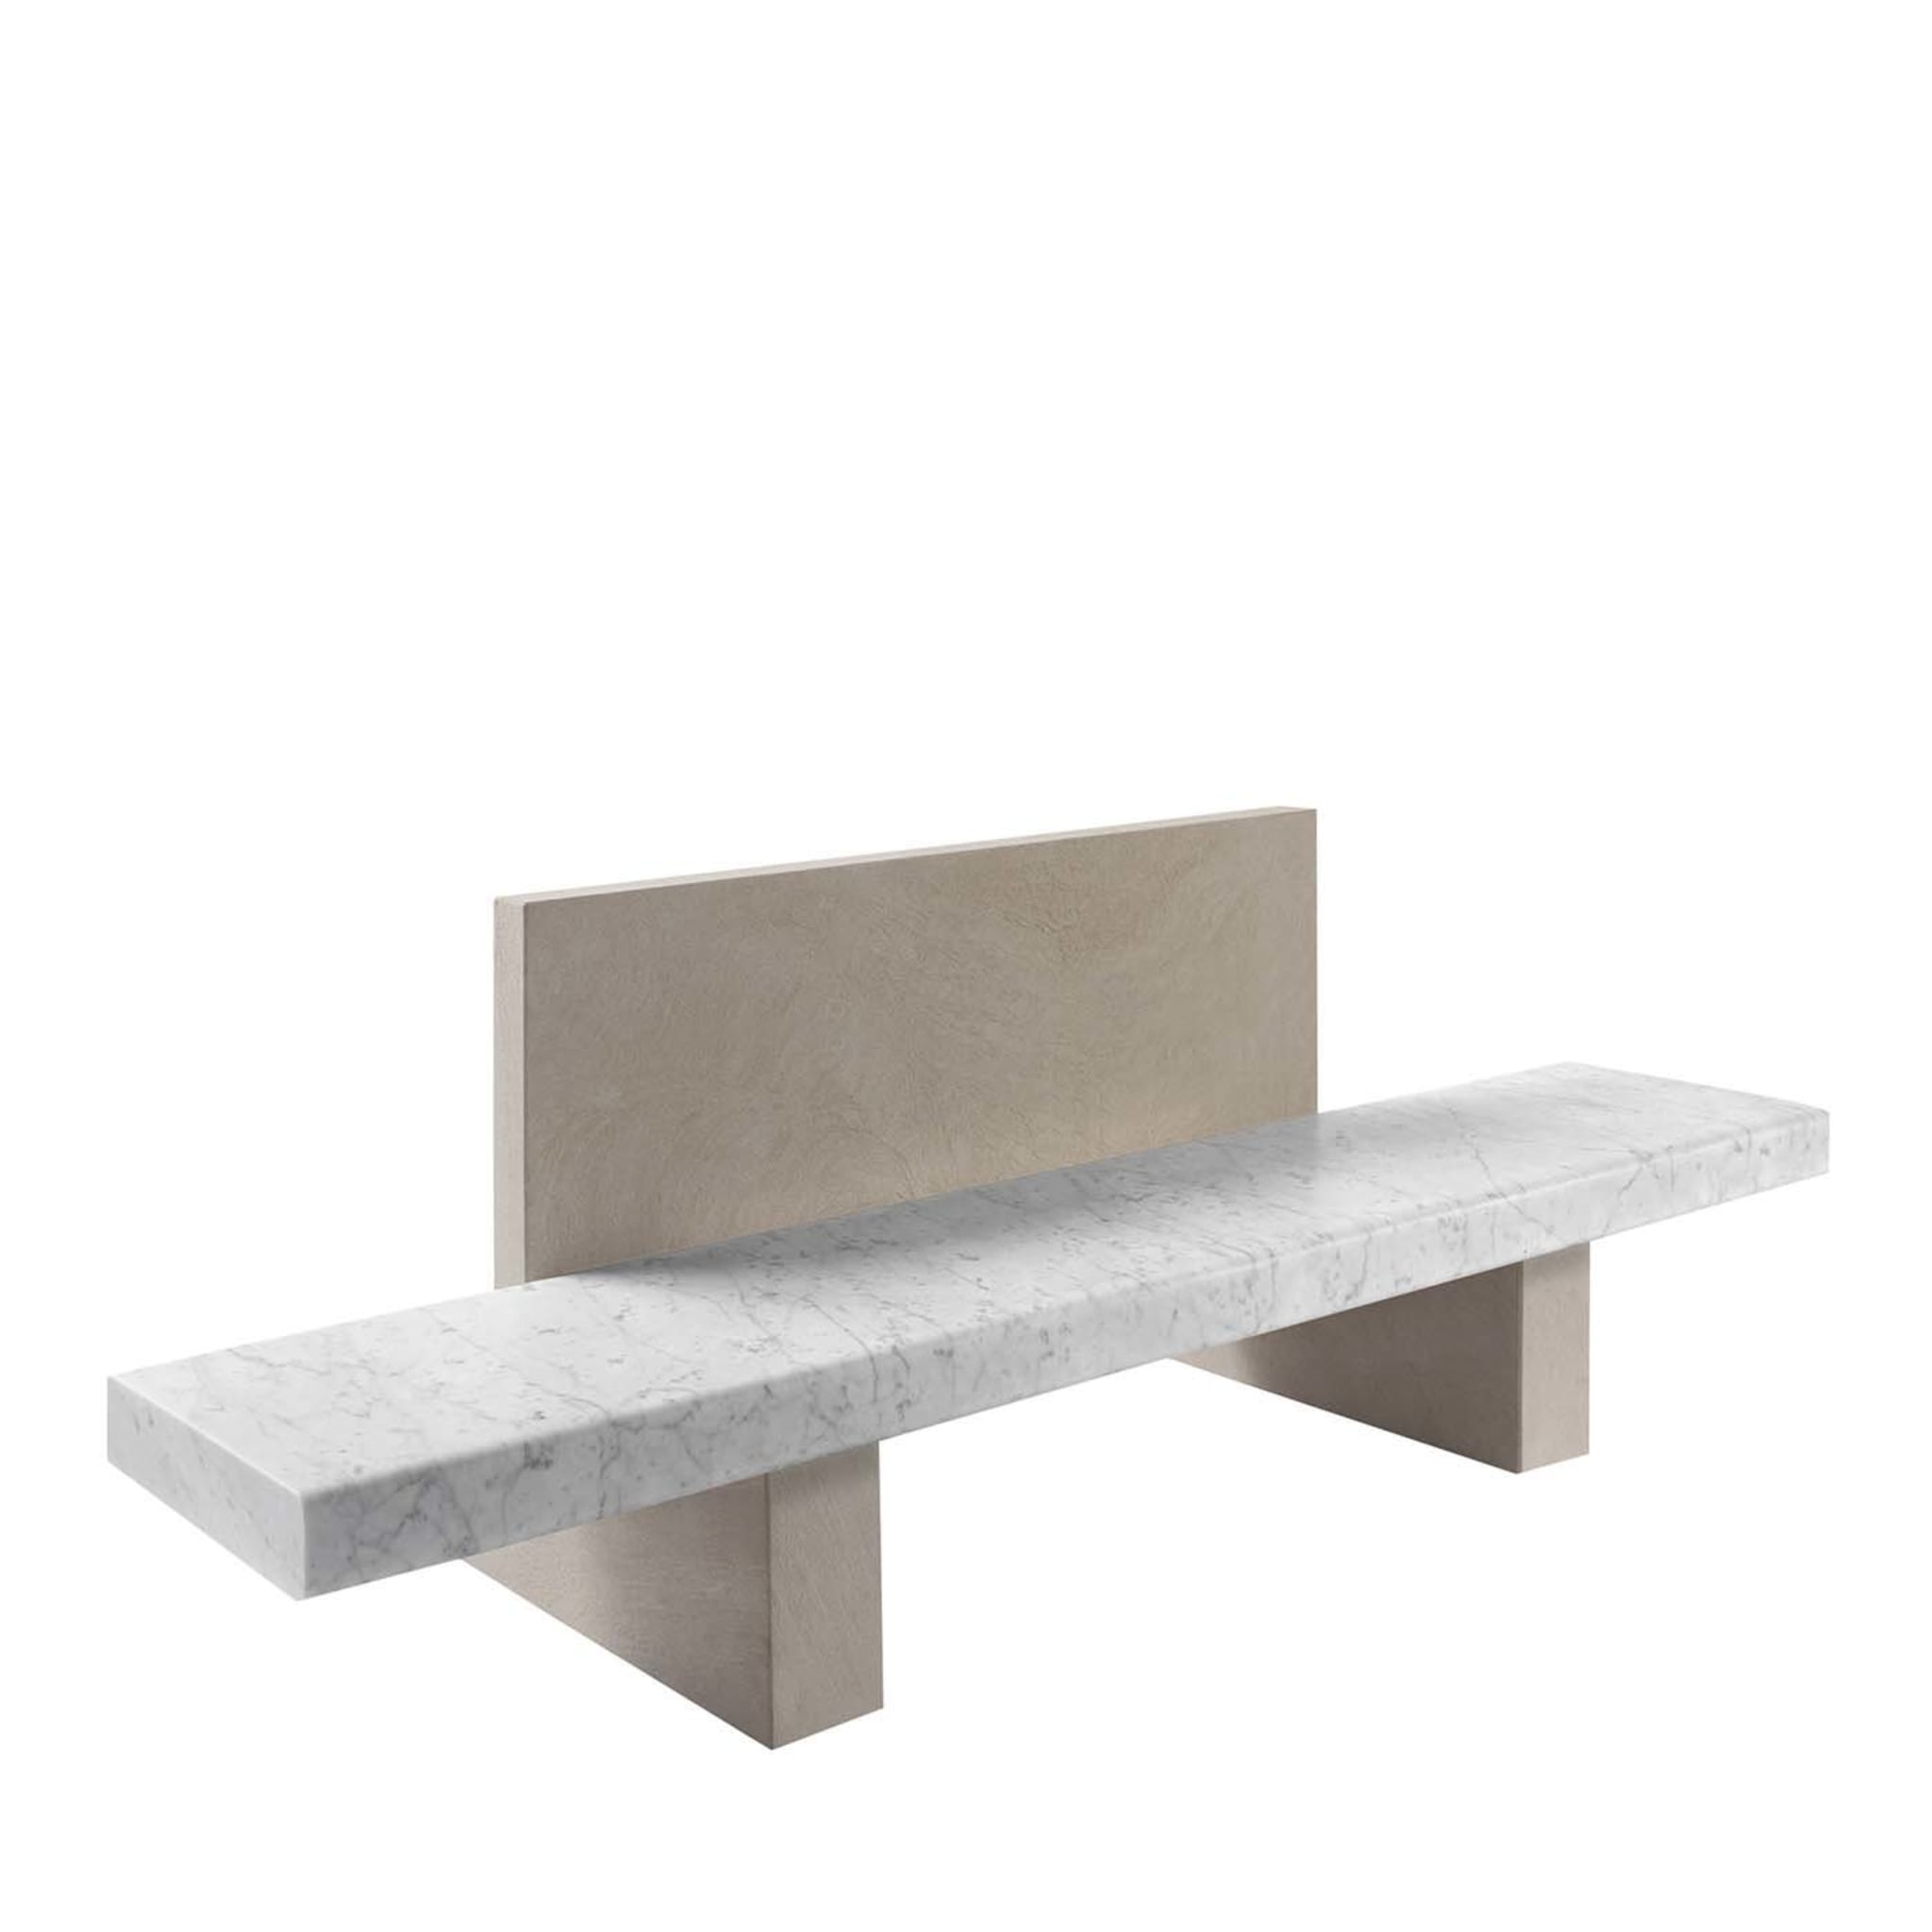 Span Outdoor Bench with Backrest by John Pawson - Alternative view 1